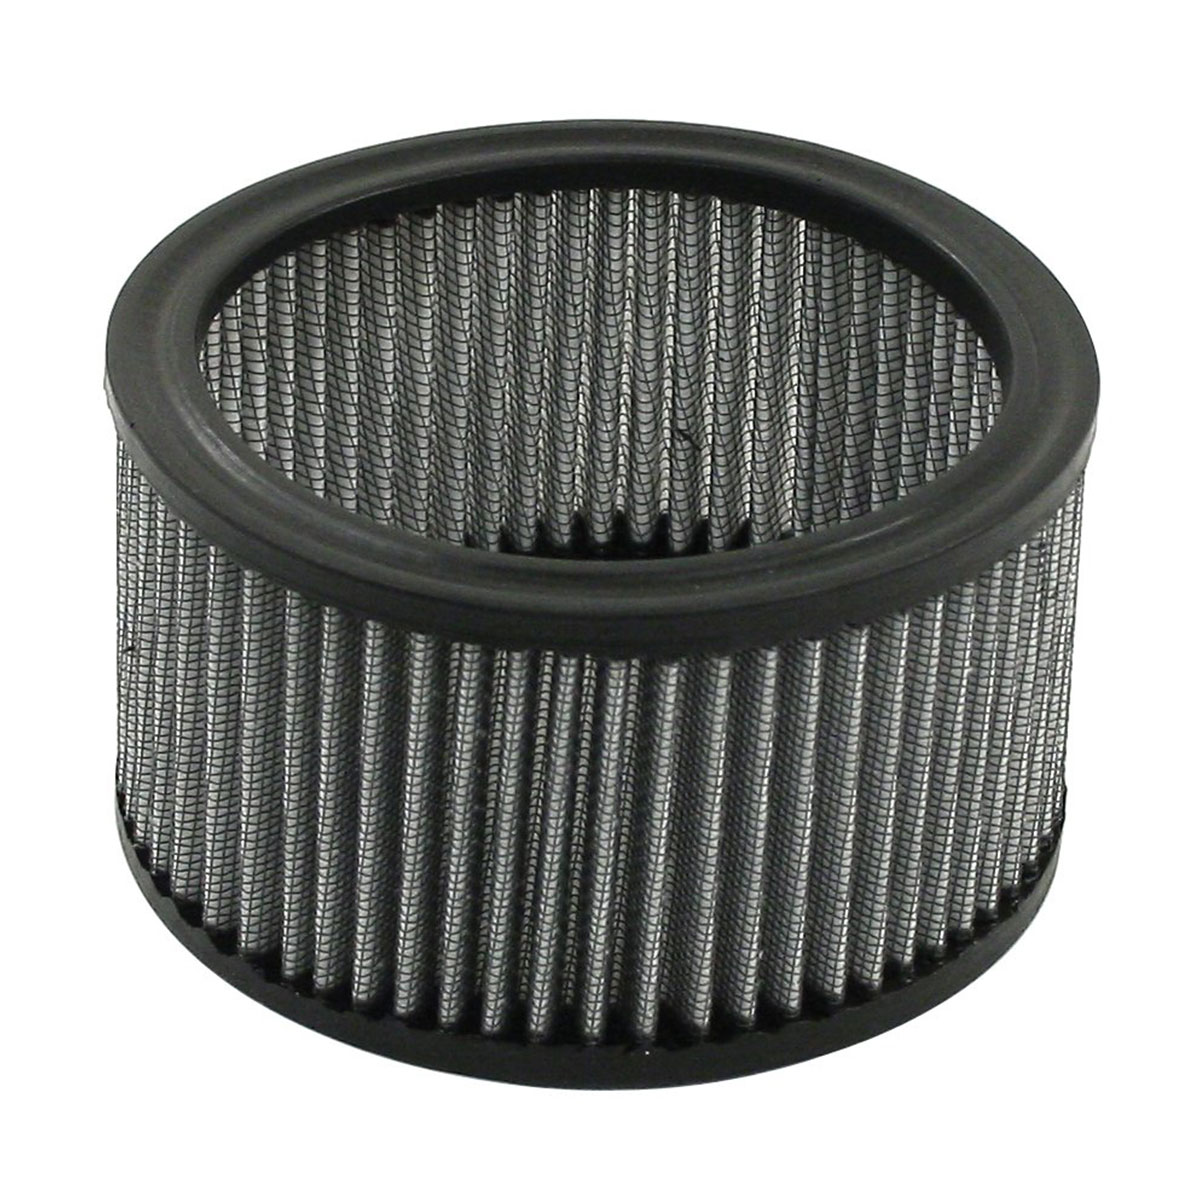 Replacement VW Air Cleaner Filter Element - High Flow - Round 5 1/2" Diameter - 3 1/8" High